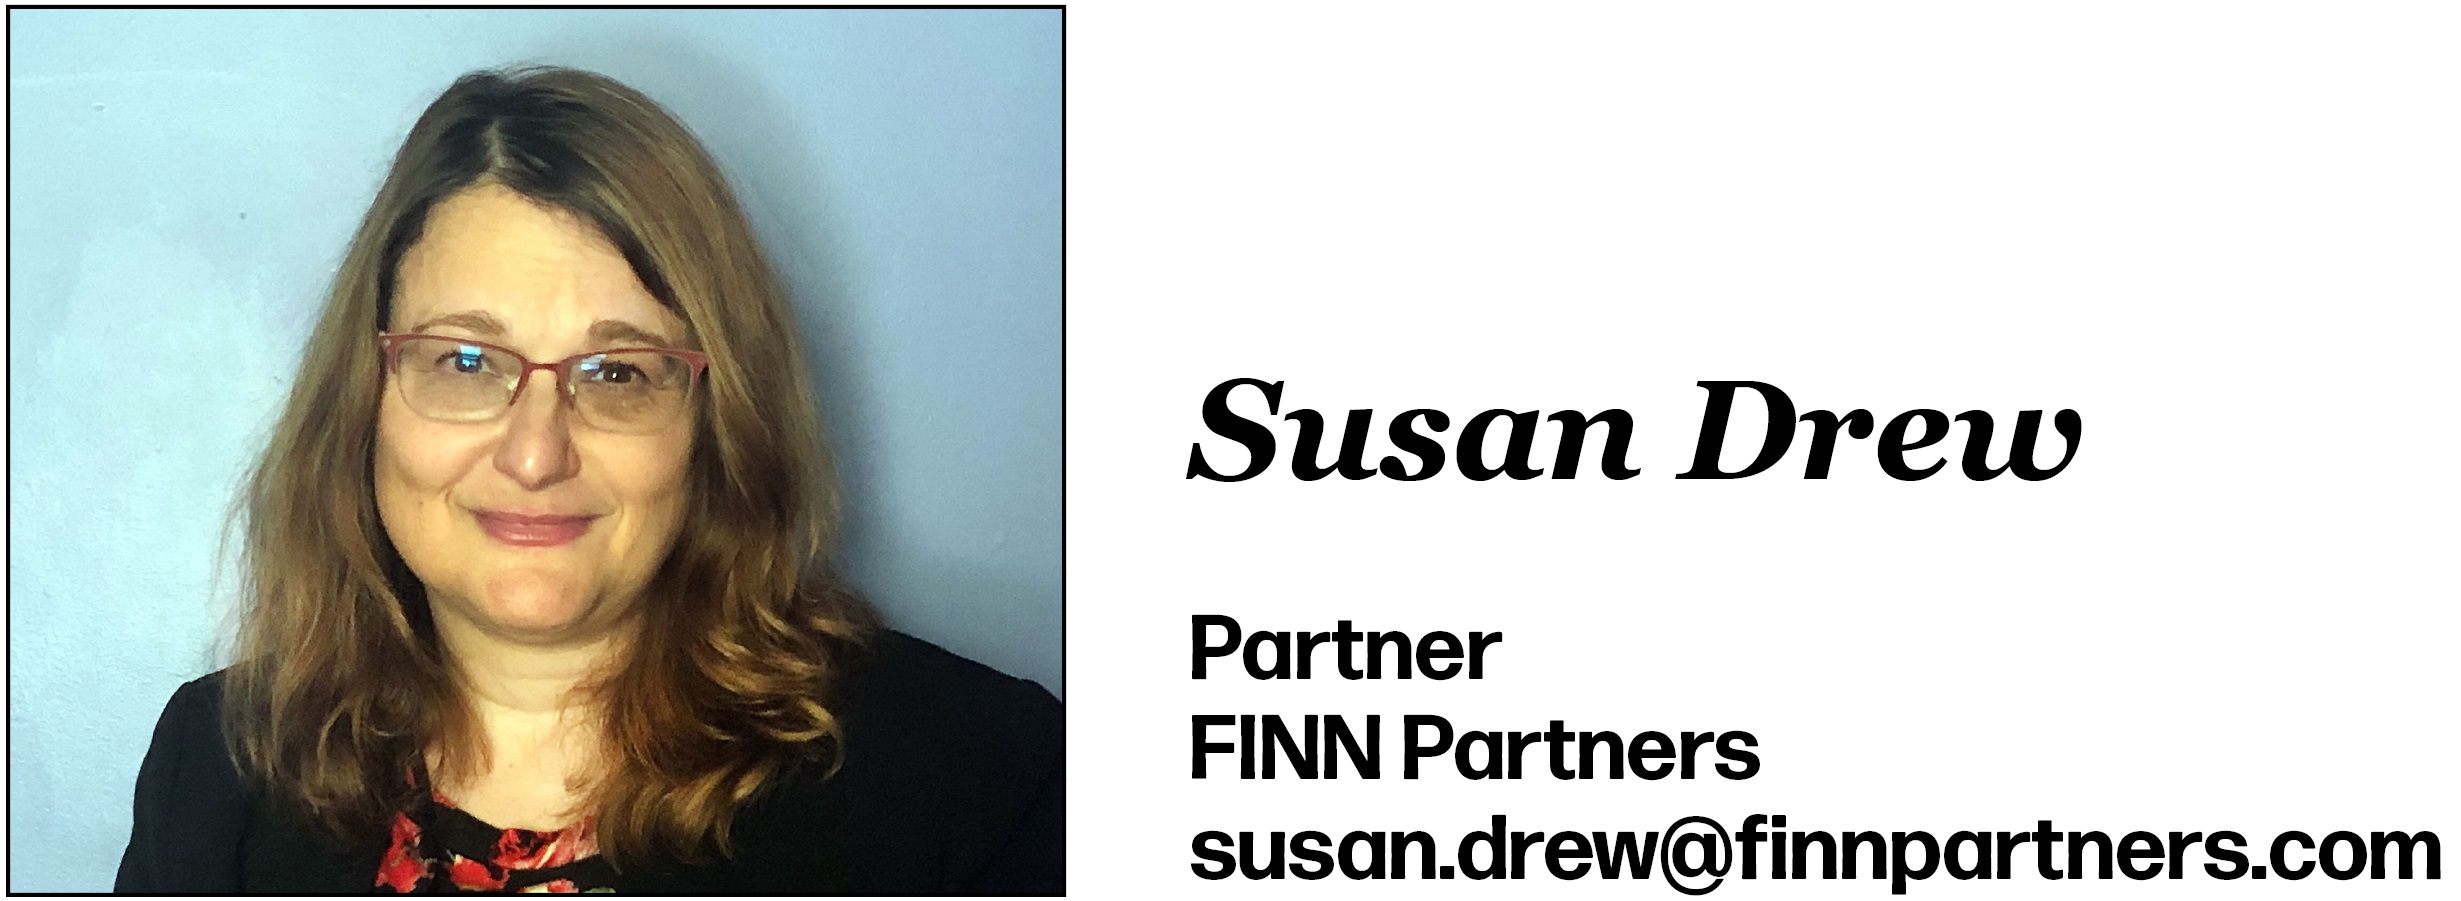 Susan Drew is Partner at FINN Partners. Her email is susan.drew@finnpartners.com. 